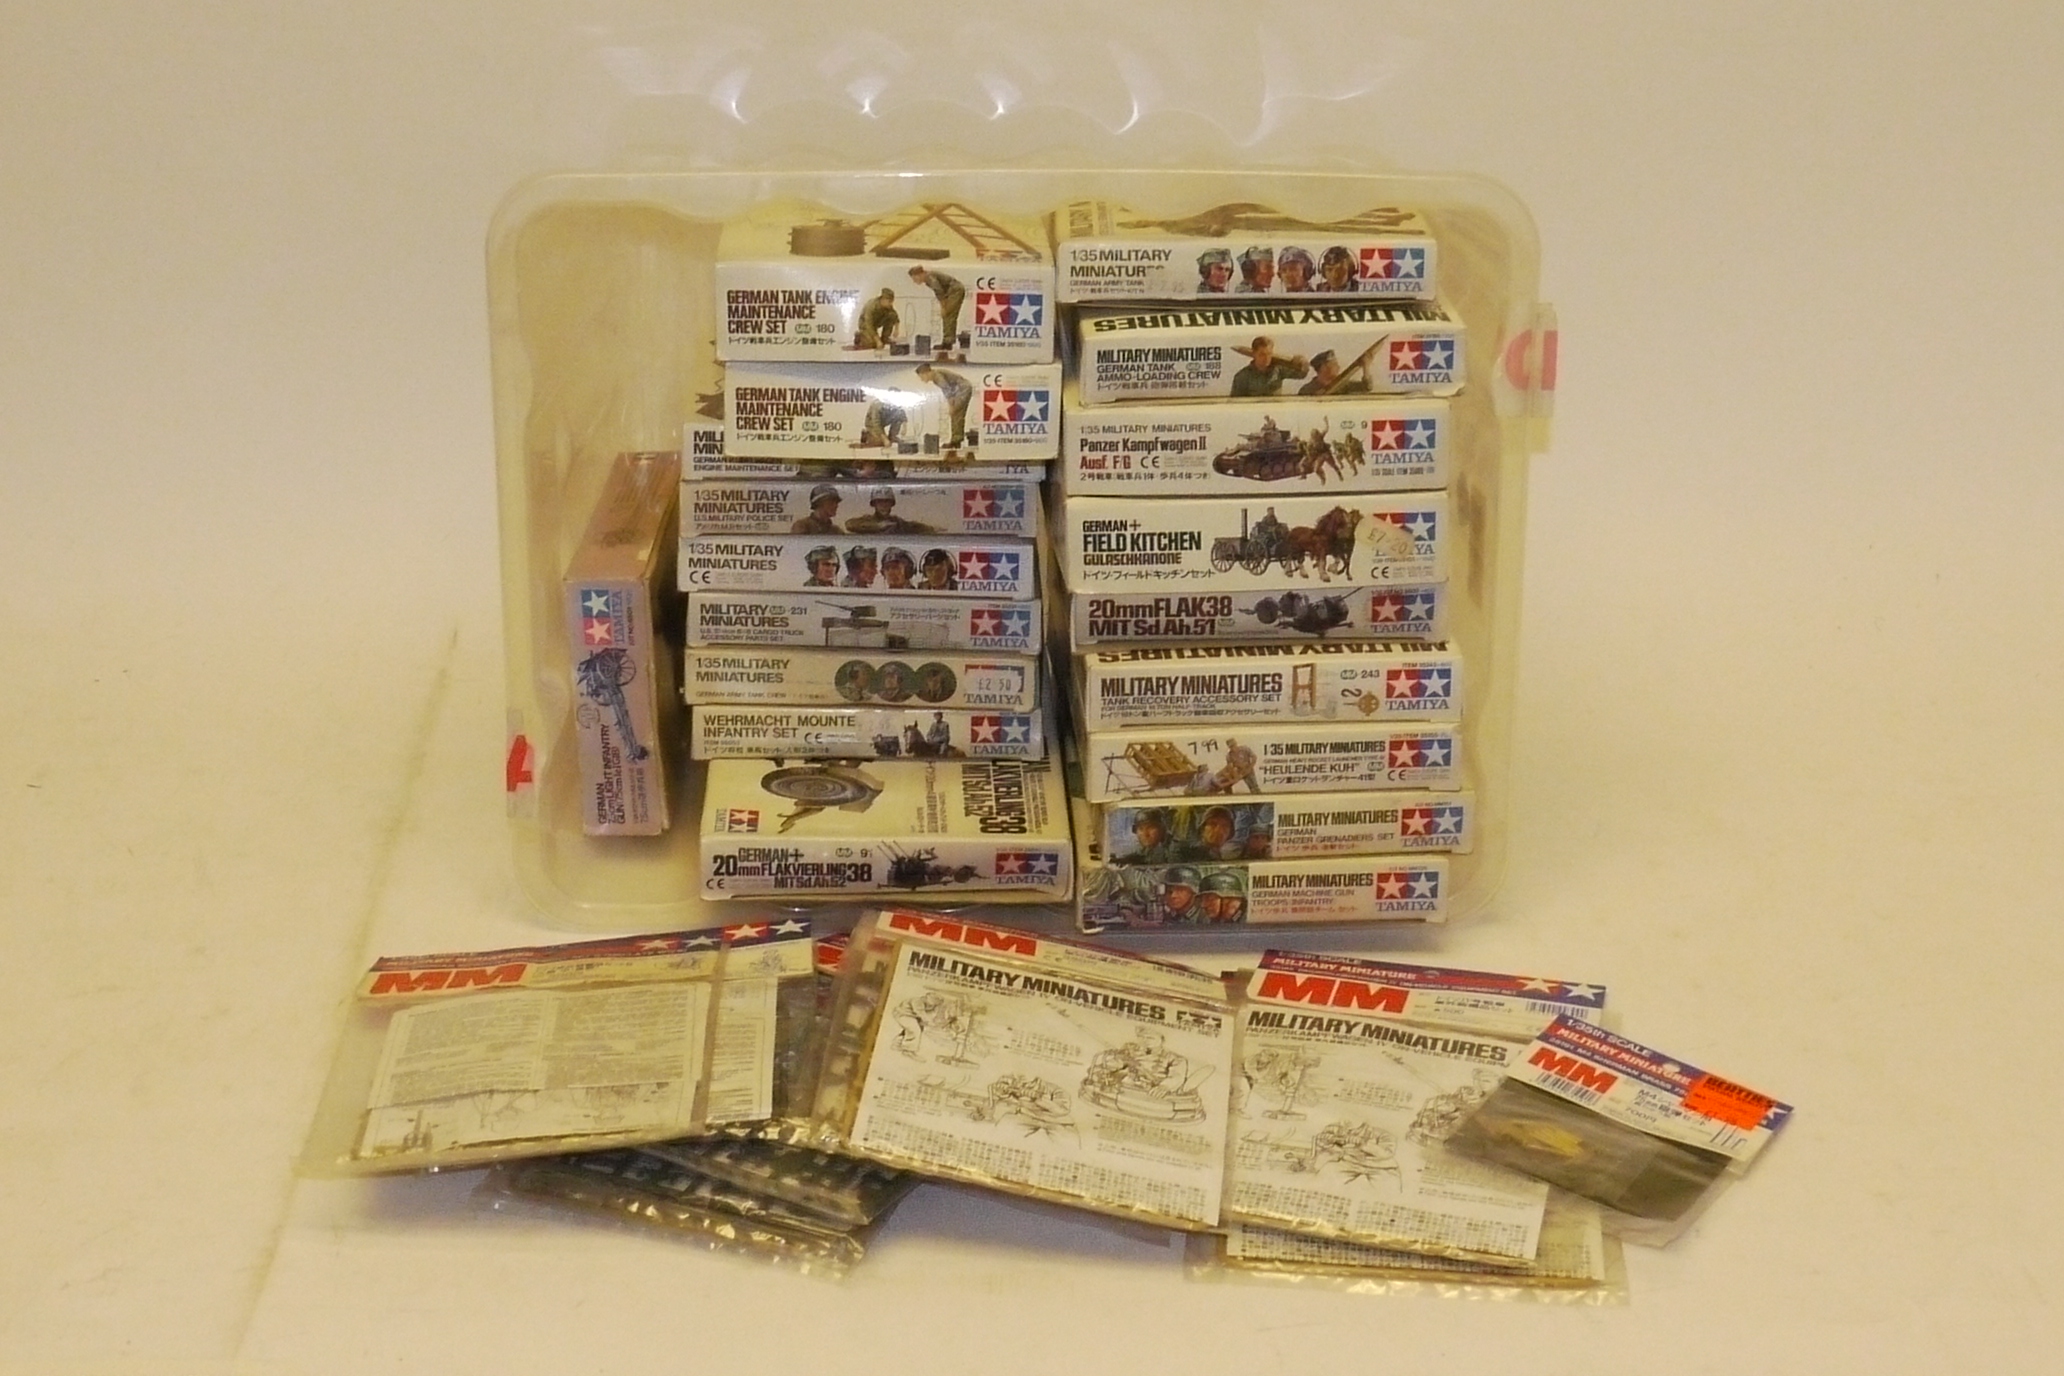 Tamiya Military Model Kits, A boxed collection of 1:35 scale German and Allied world war II military - Image 2 of 2